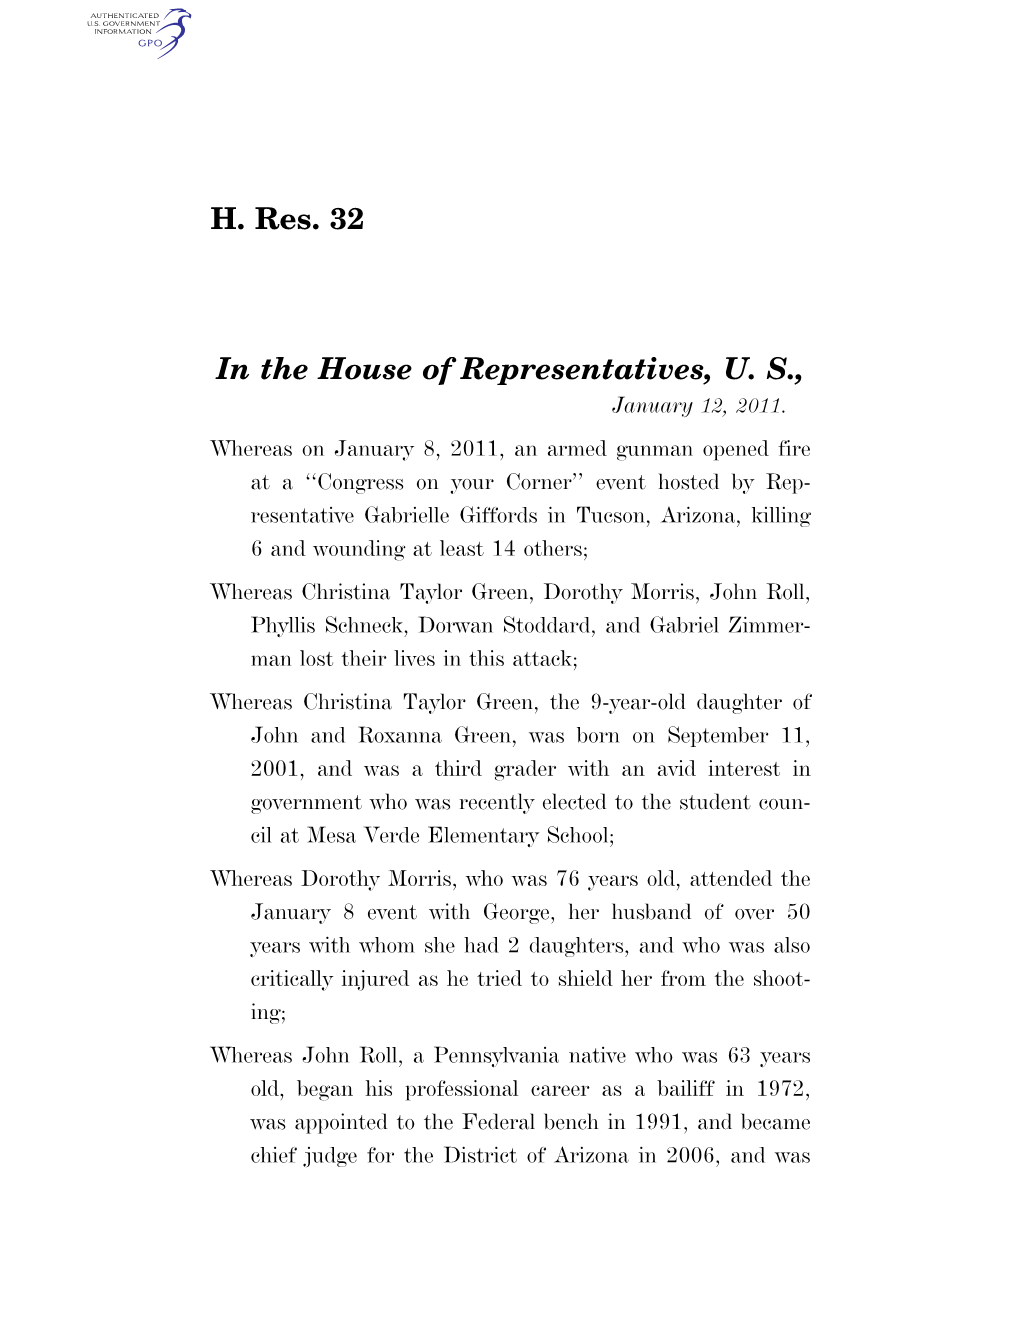 H. Res. 32 in the House of Representatives, U